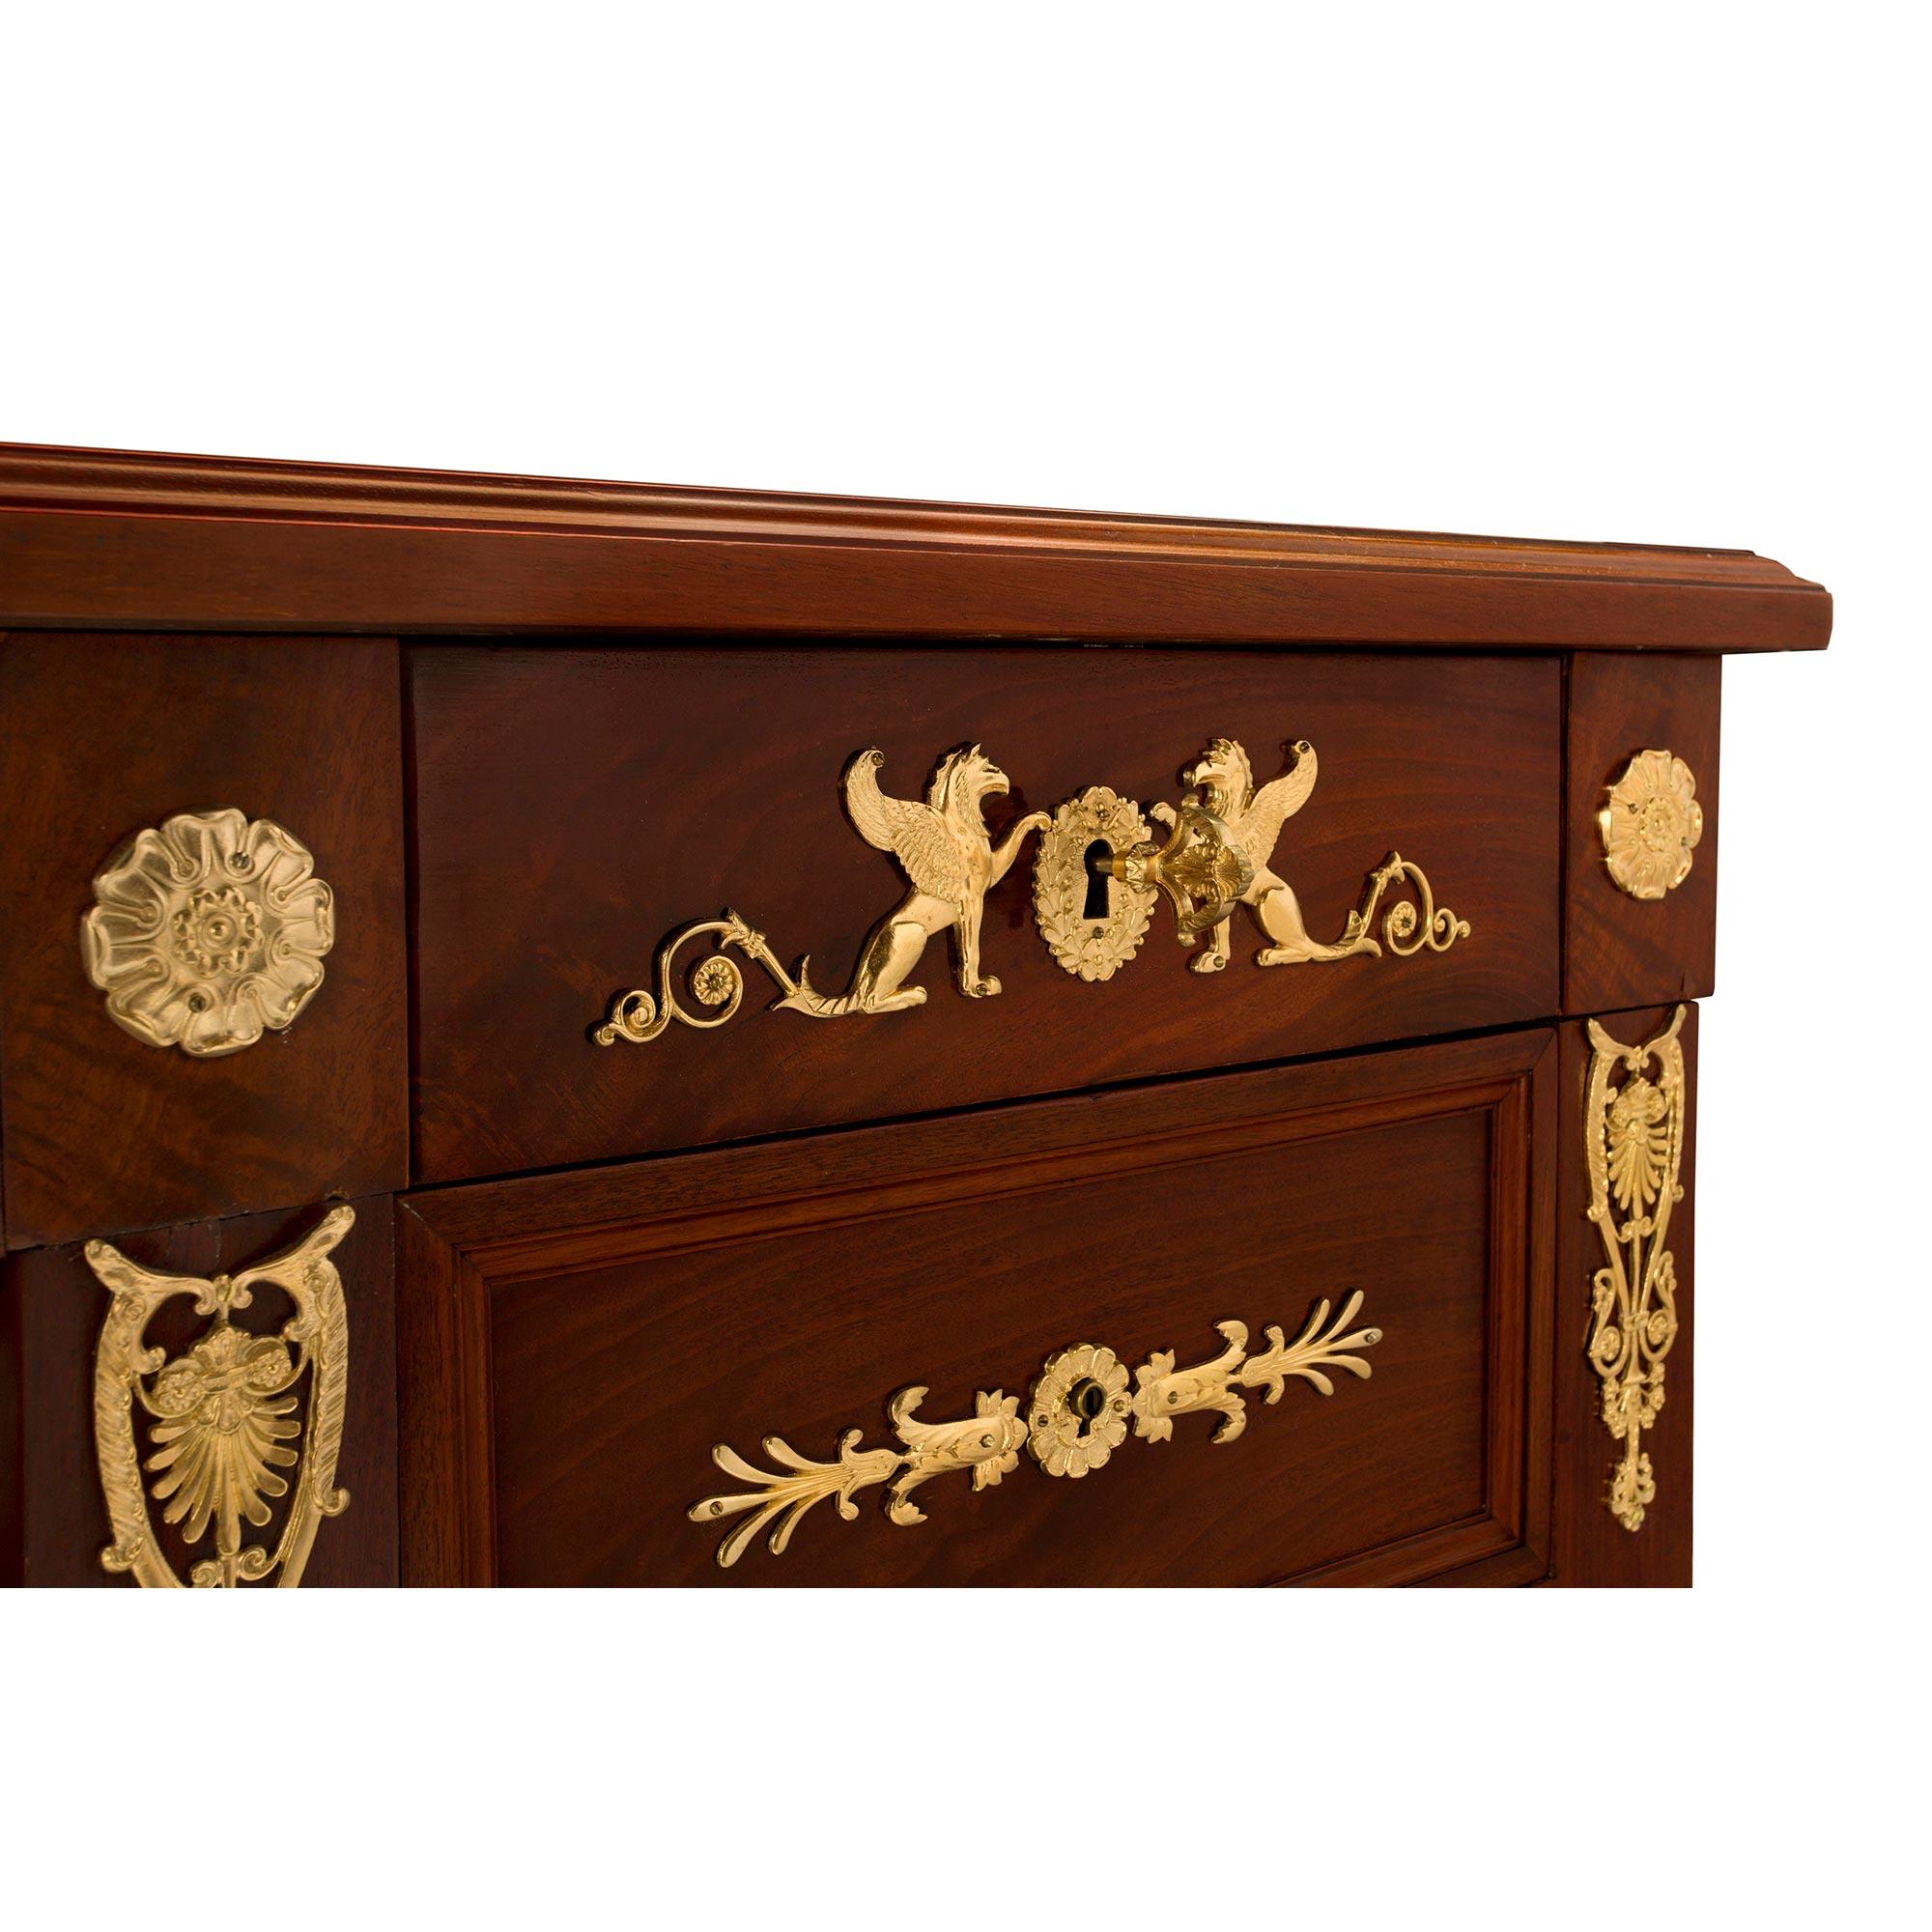 French 19th Century Empire St. Mahogany and Ormolu Executive Desk For Sale 7